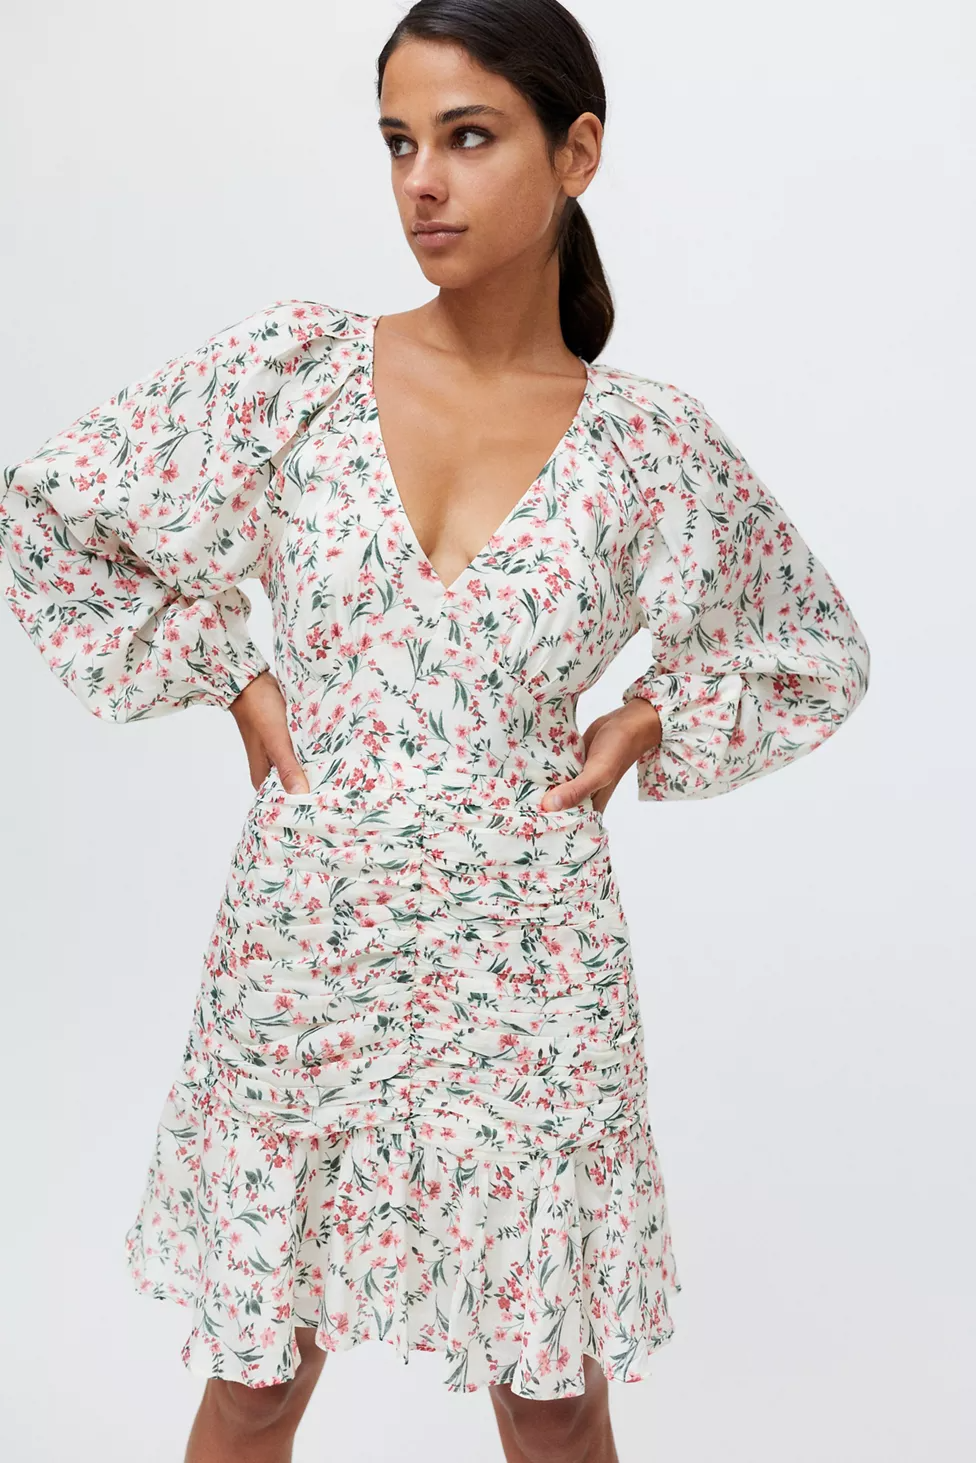 Spark Stylish Savings With These July 4th Clothing Sales